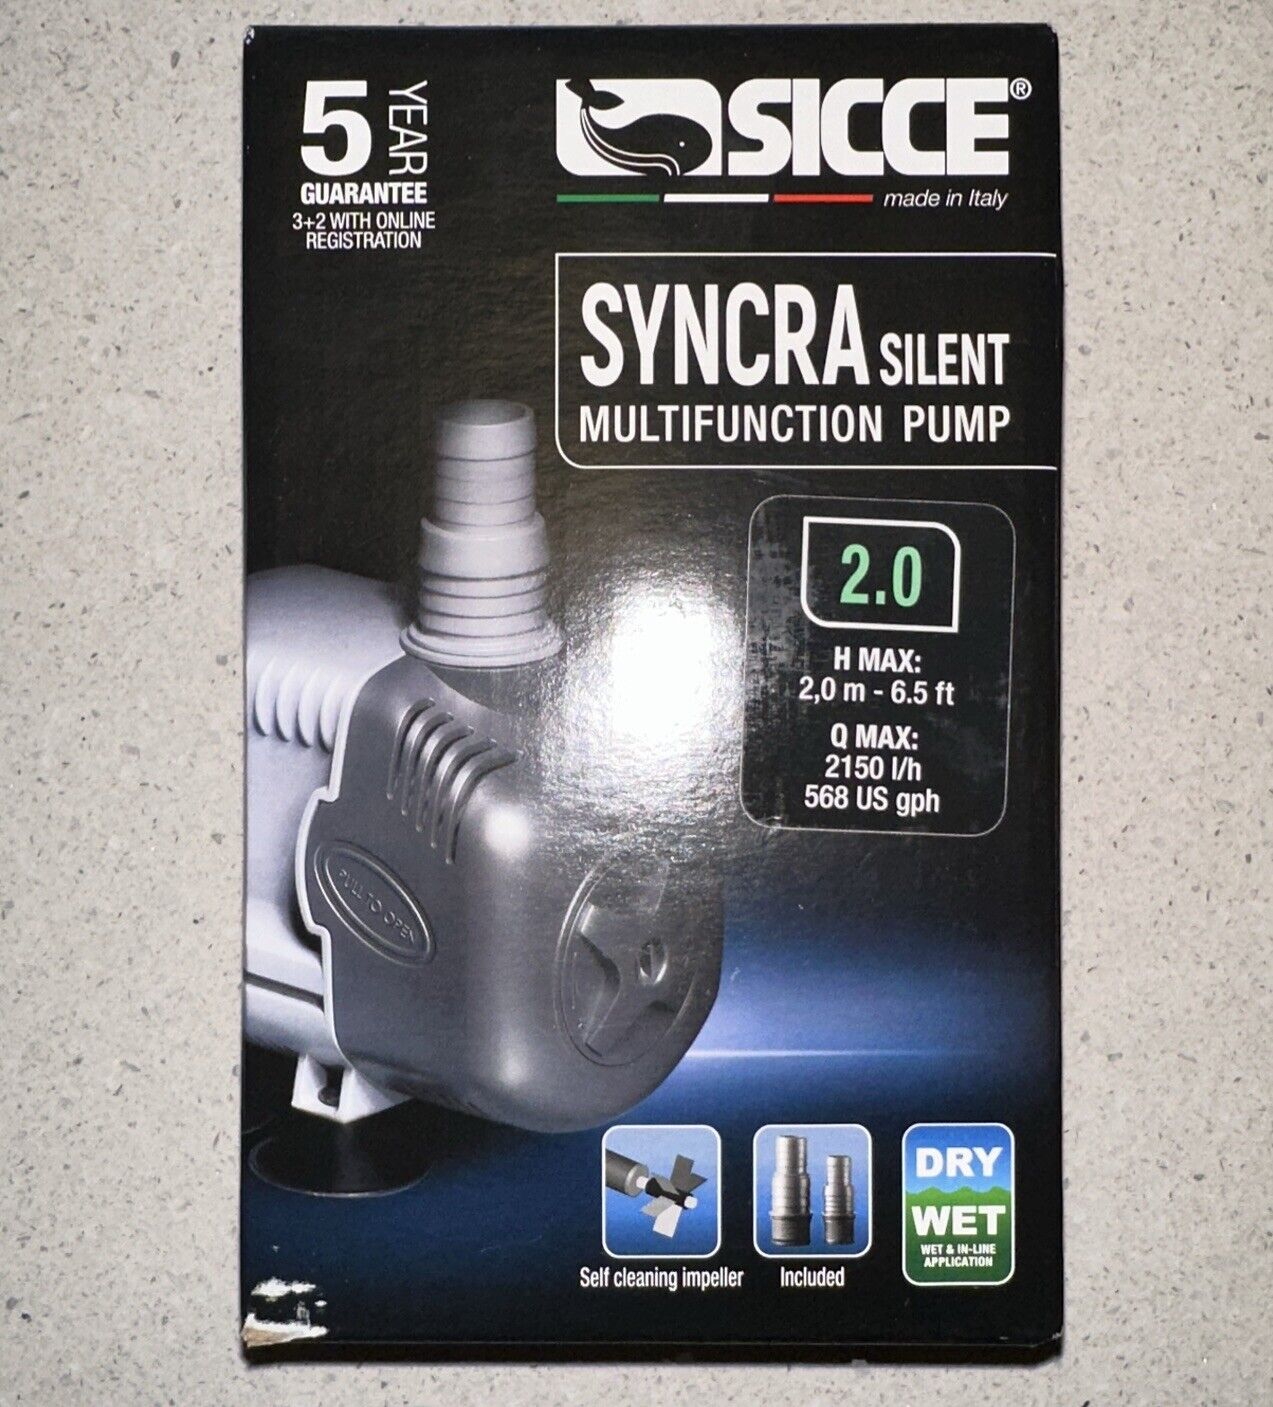 Sicce Syncra Silent Multifunction 2.0 Pump (568 GPH) - 💧NEW💧